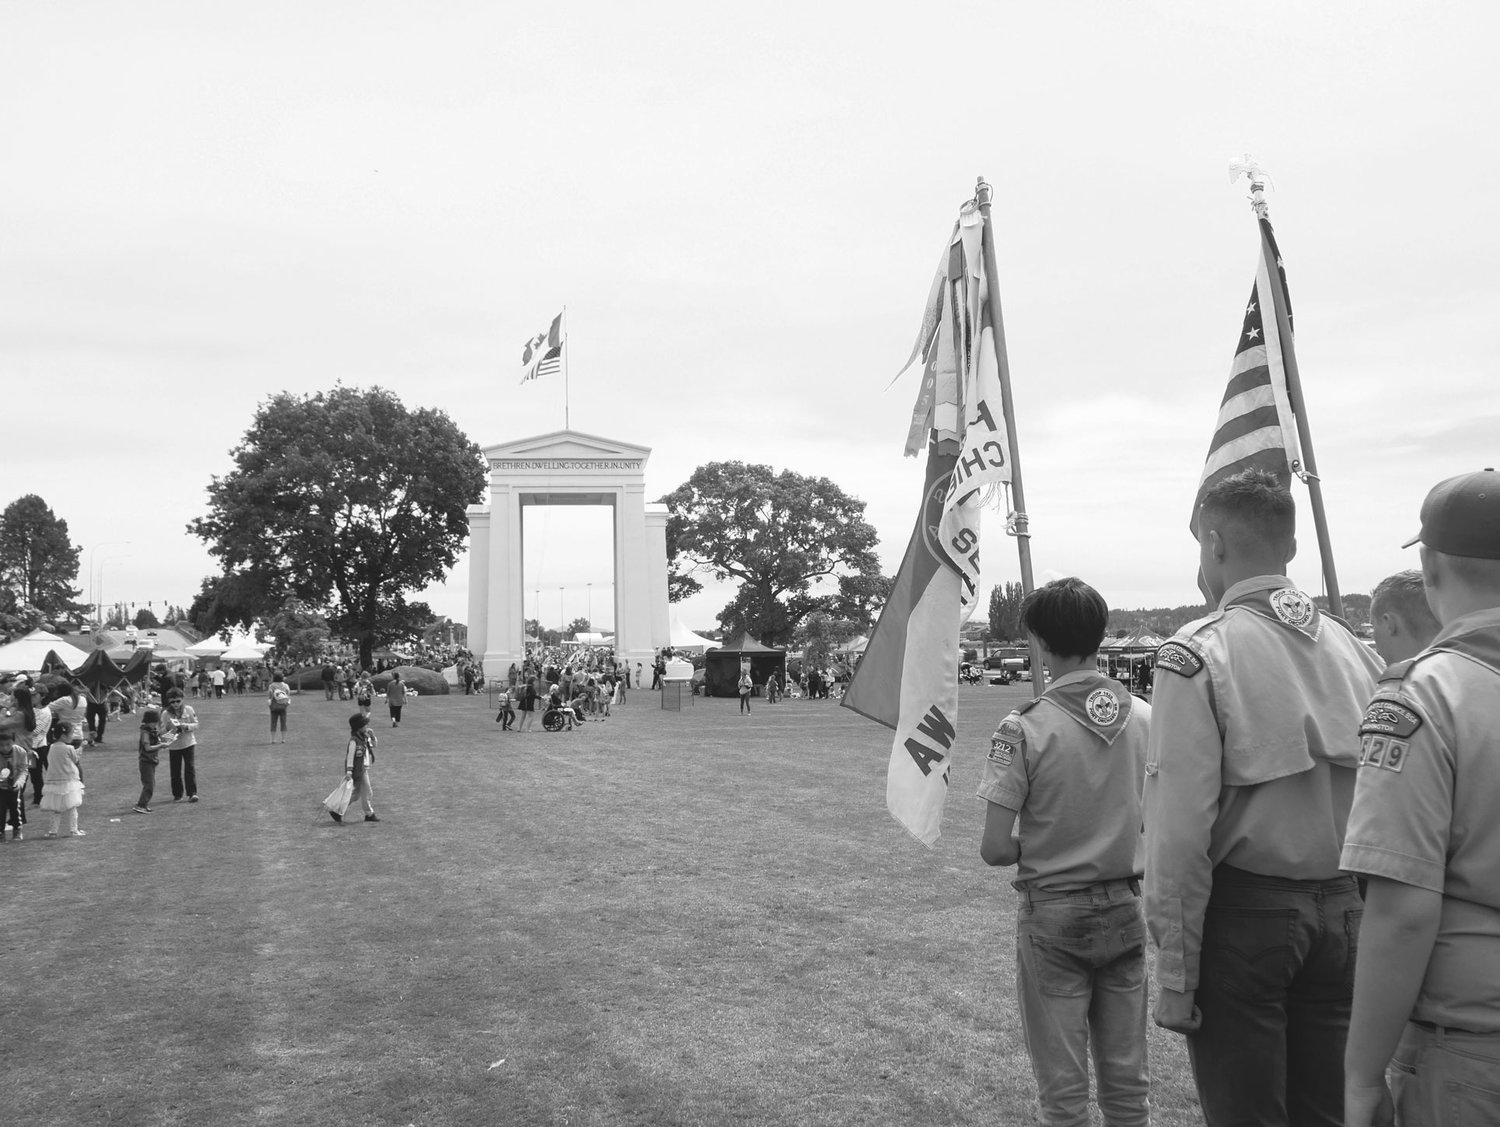 Scouts at Hands Across the Border on June 9, 2019.